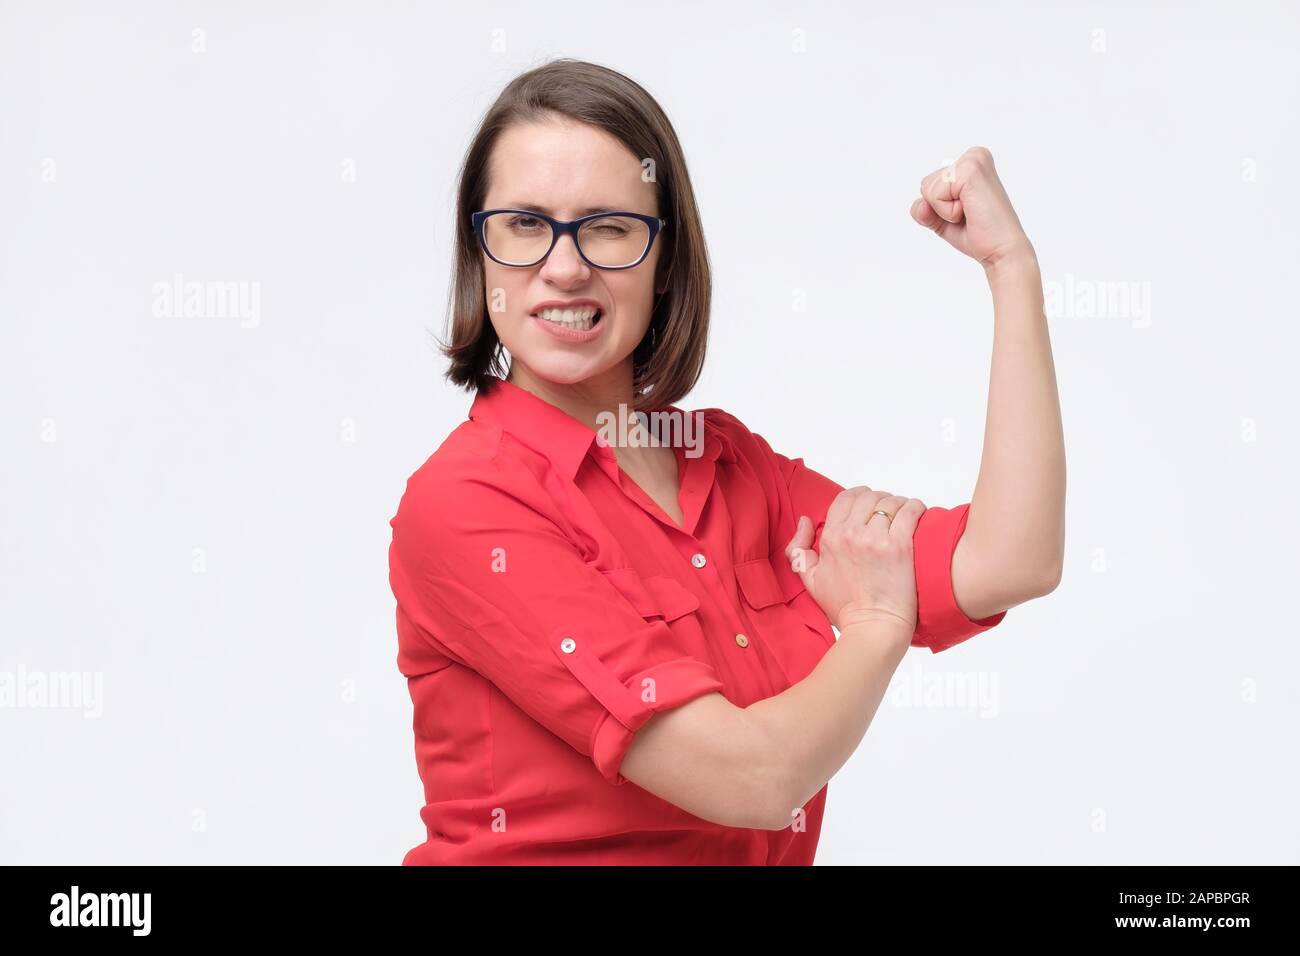 Young caucasian woman flexing her biceps showing her strength and